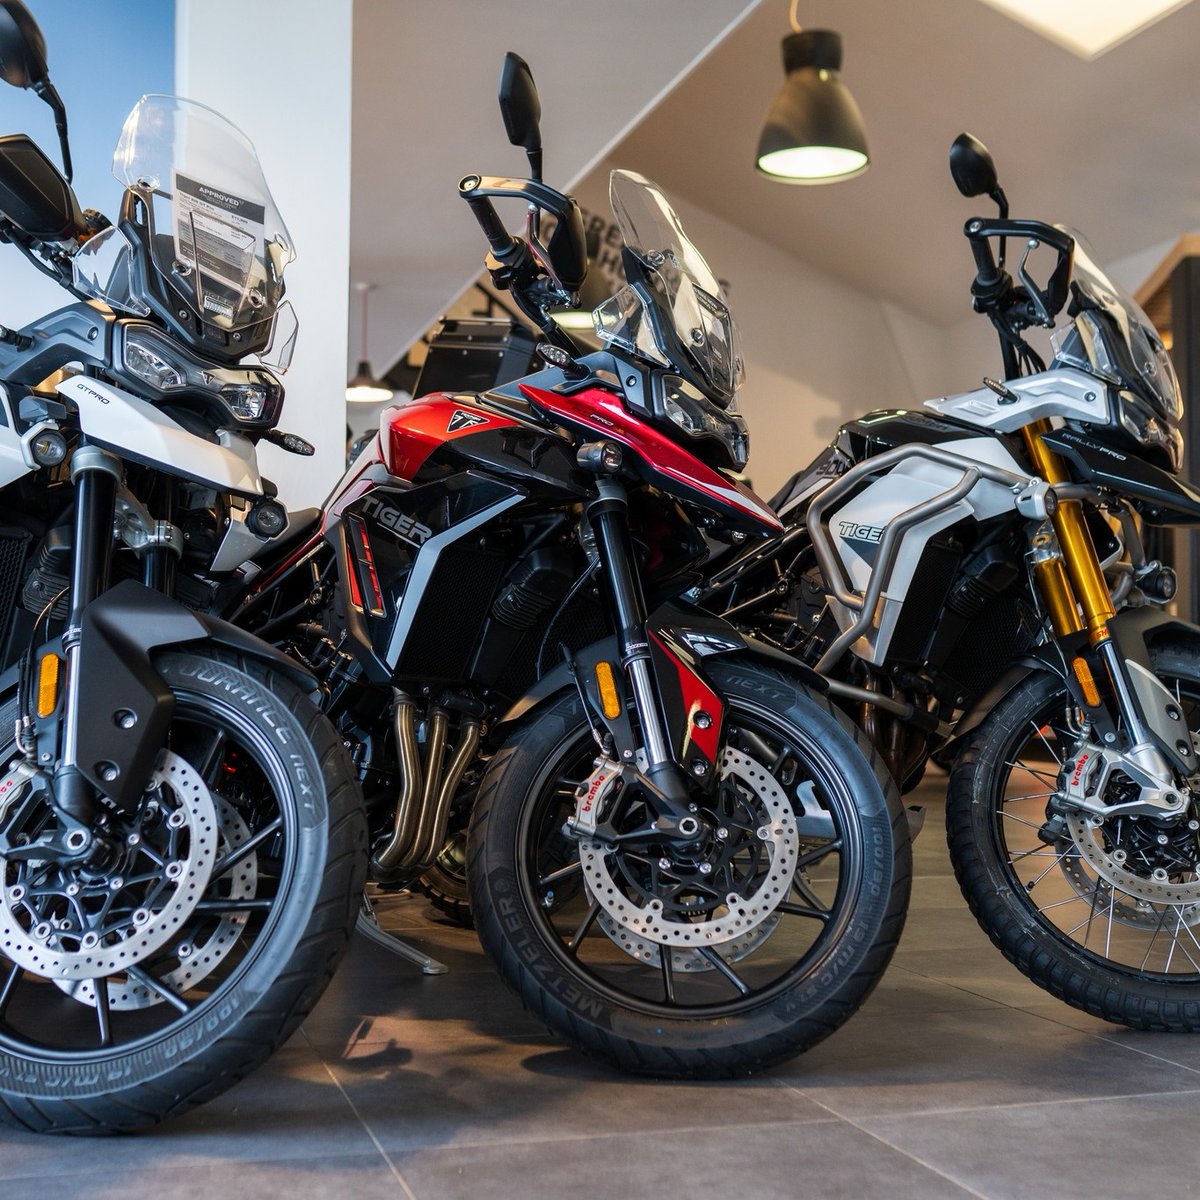 Motorcycle Detailer/Valeter opportunity with LIND Motor Group at their top @UKTriumph motorcycles business in East London. @JCPinEastLondon #triumph #motorcycles #motorcyclejobs #bikejobs #jobs #jobsearch #vacancy #romford #eastlondon More Info & Apply 👉bikejobs.co.uk